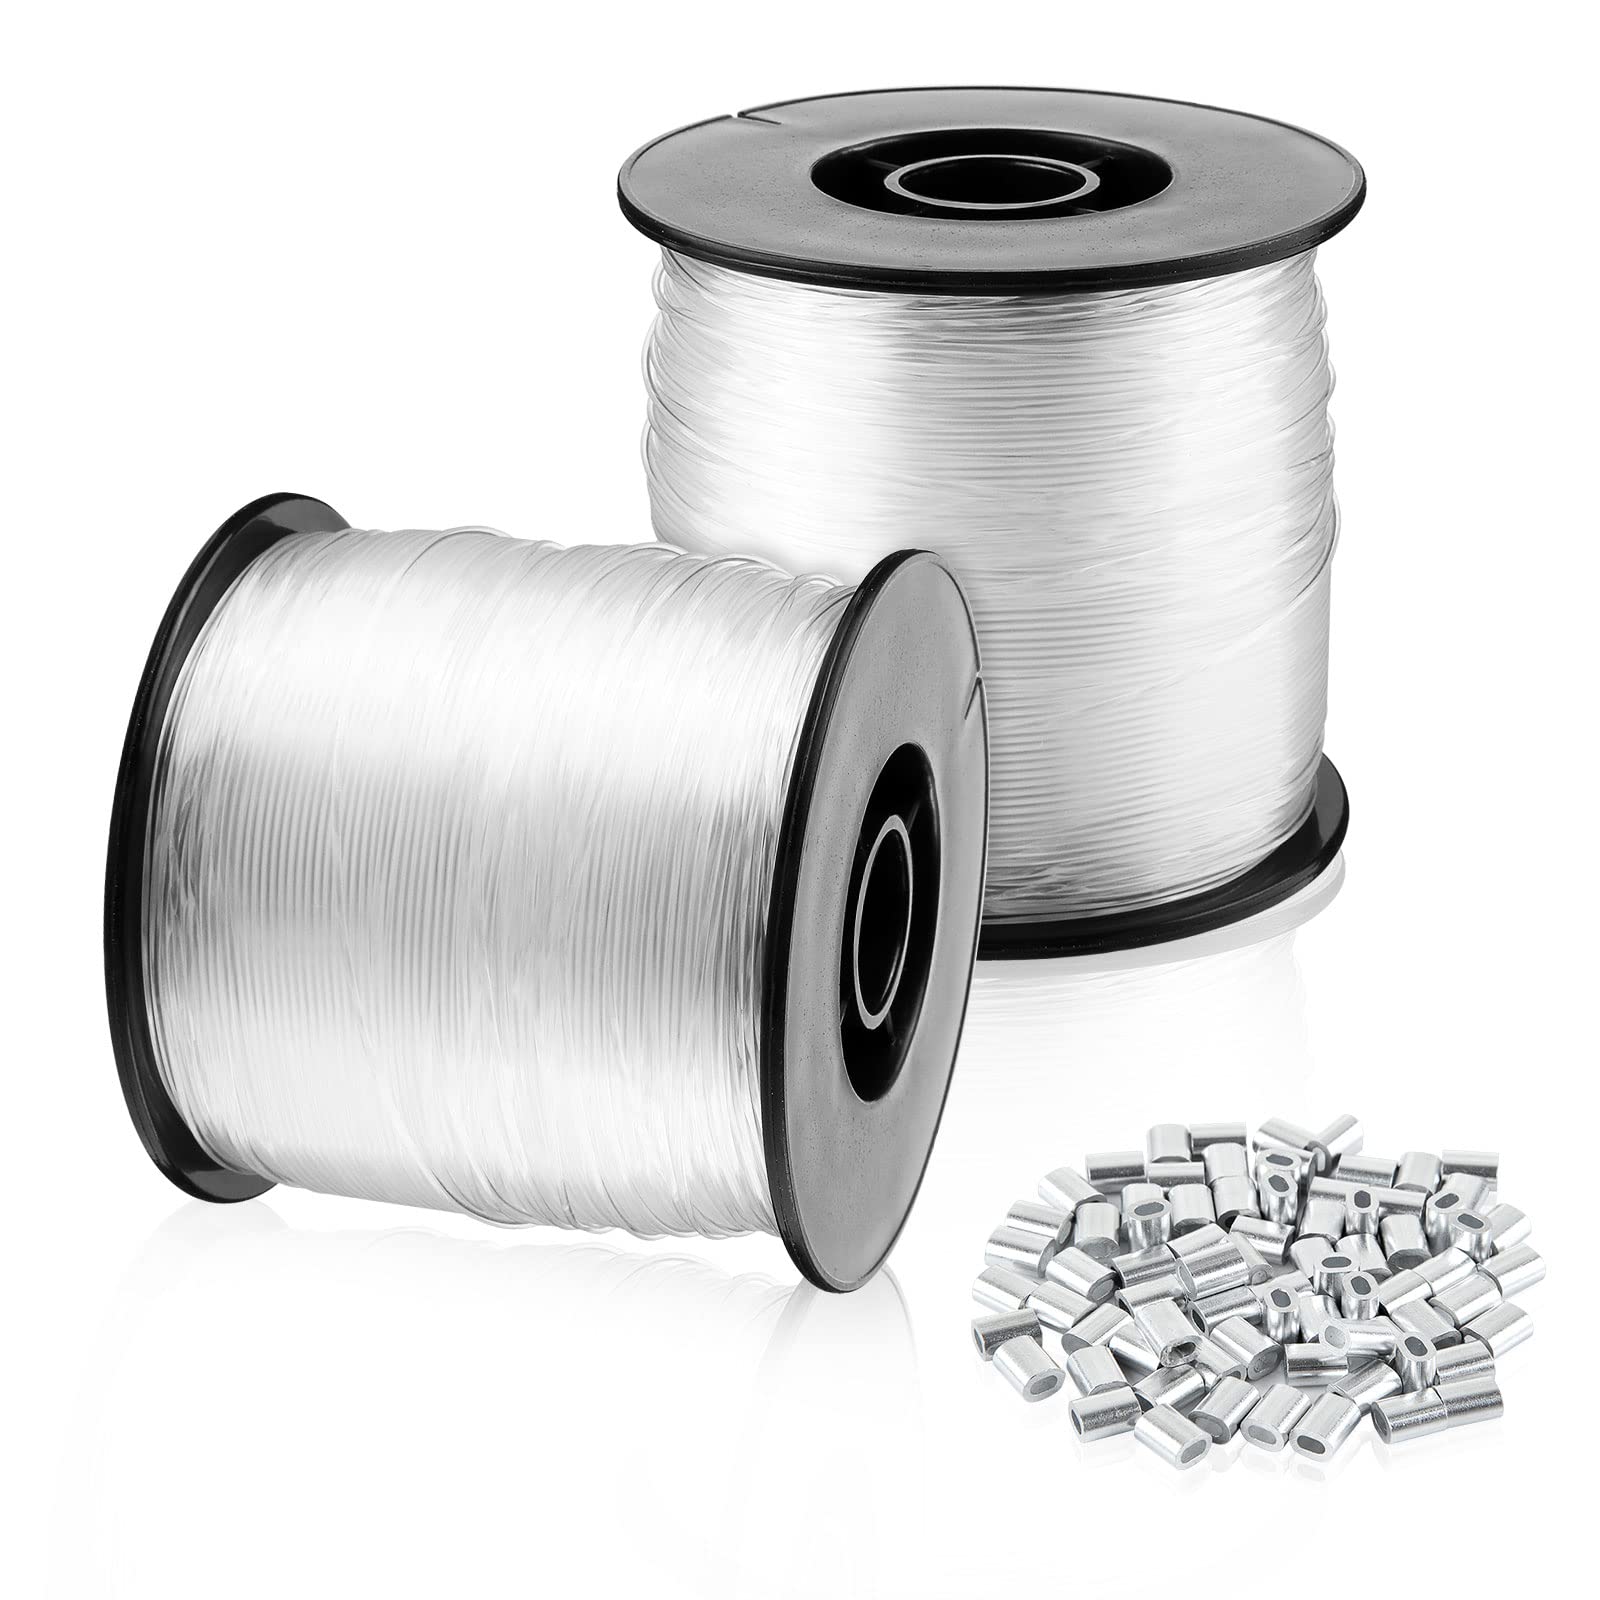 CertBuy 2 Roll 656 Feet Fishing Line for Balloon Garland, Strong Fishing  Line Clear, 0.8mm